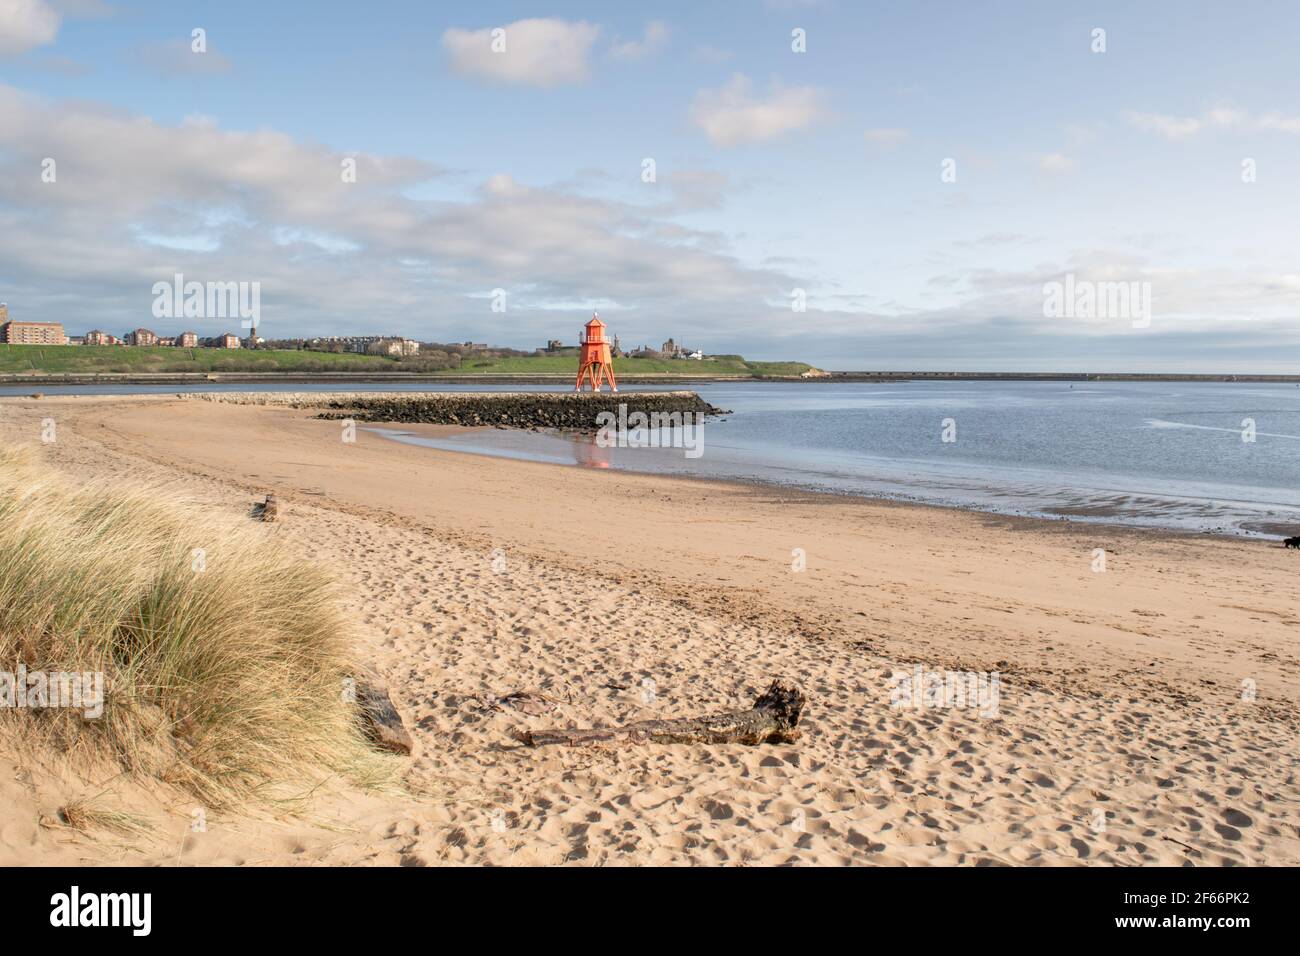 Coastline view of South Shields beach, a seaside town near Newcastle upon Tyne in the North East of England. Stock Photo